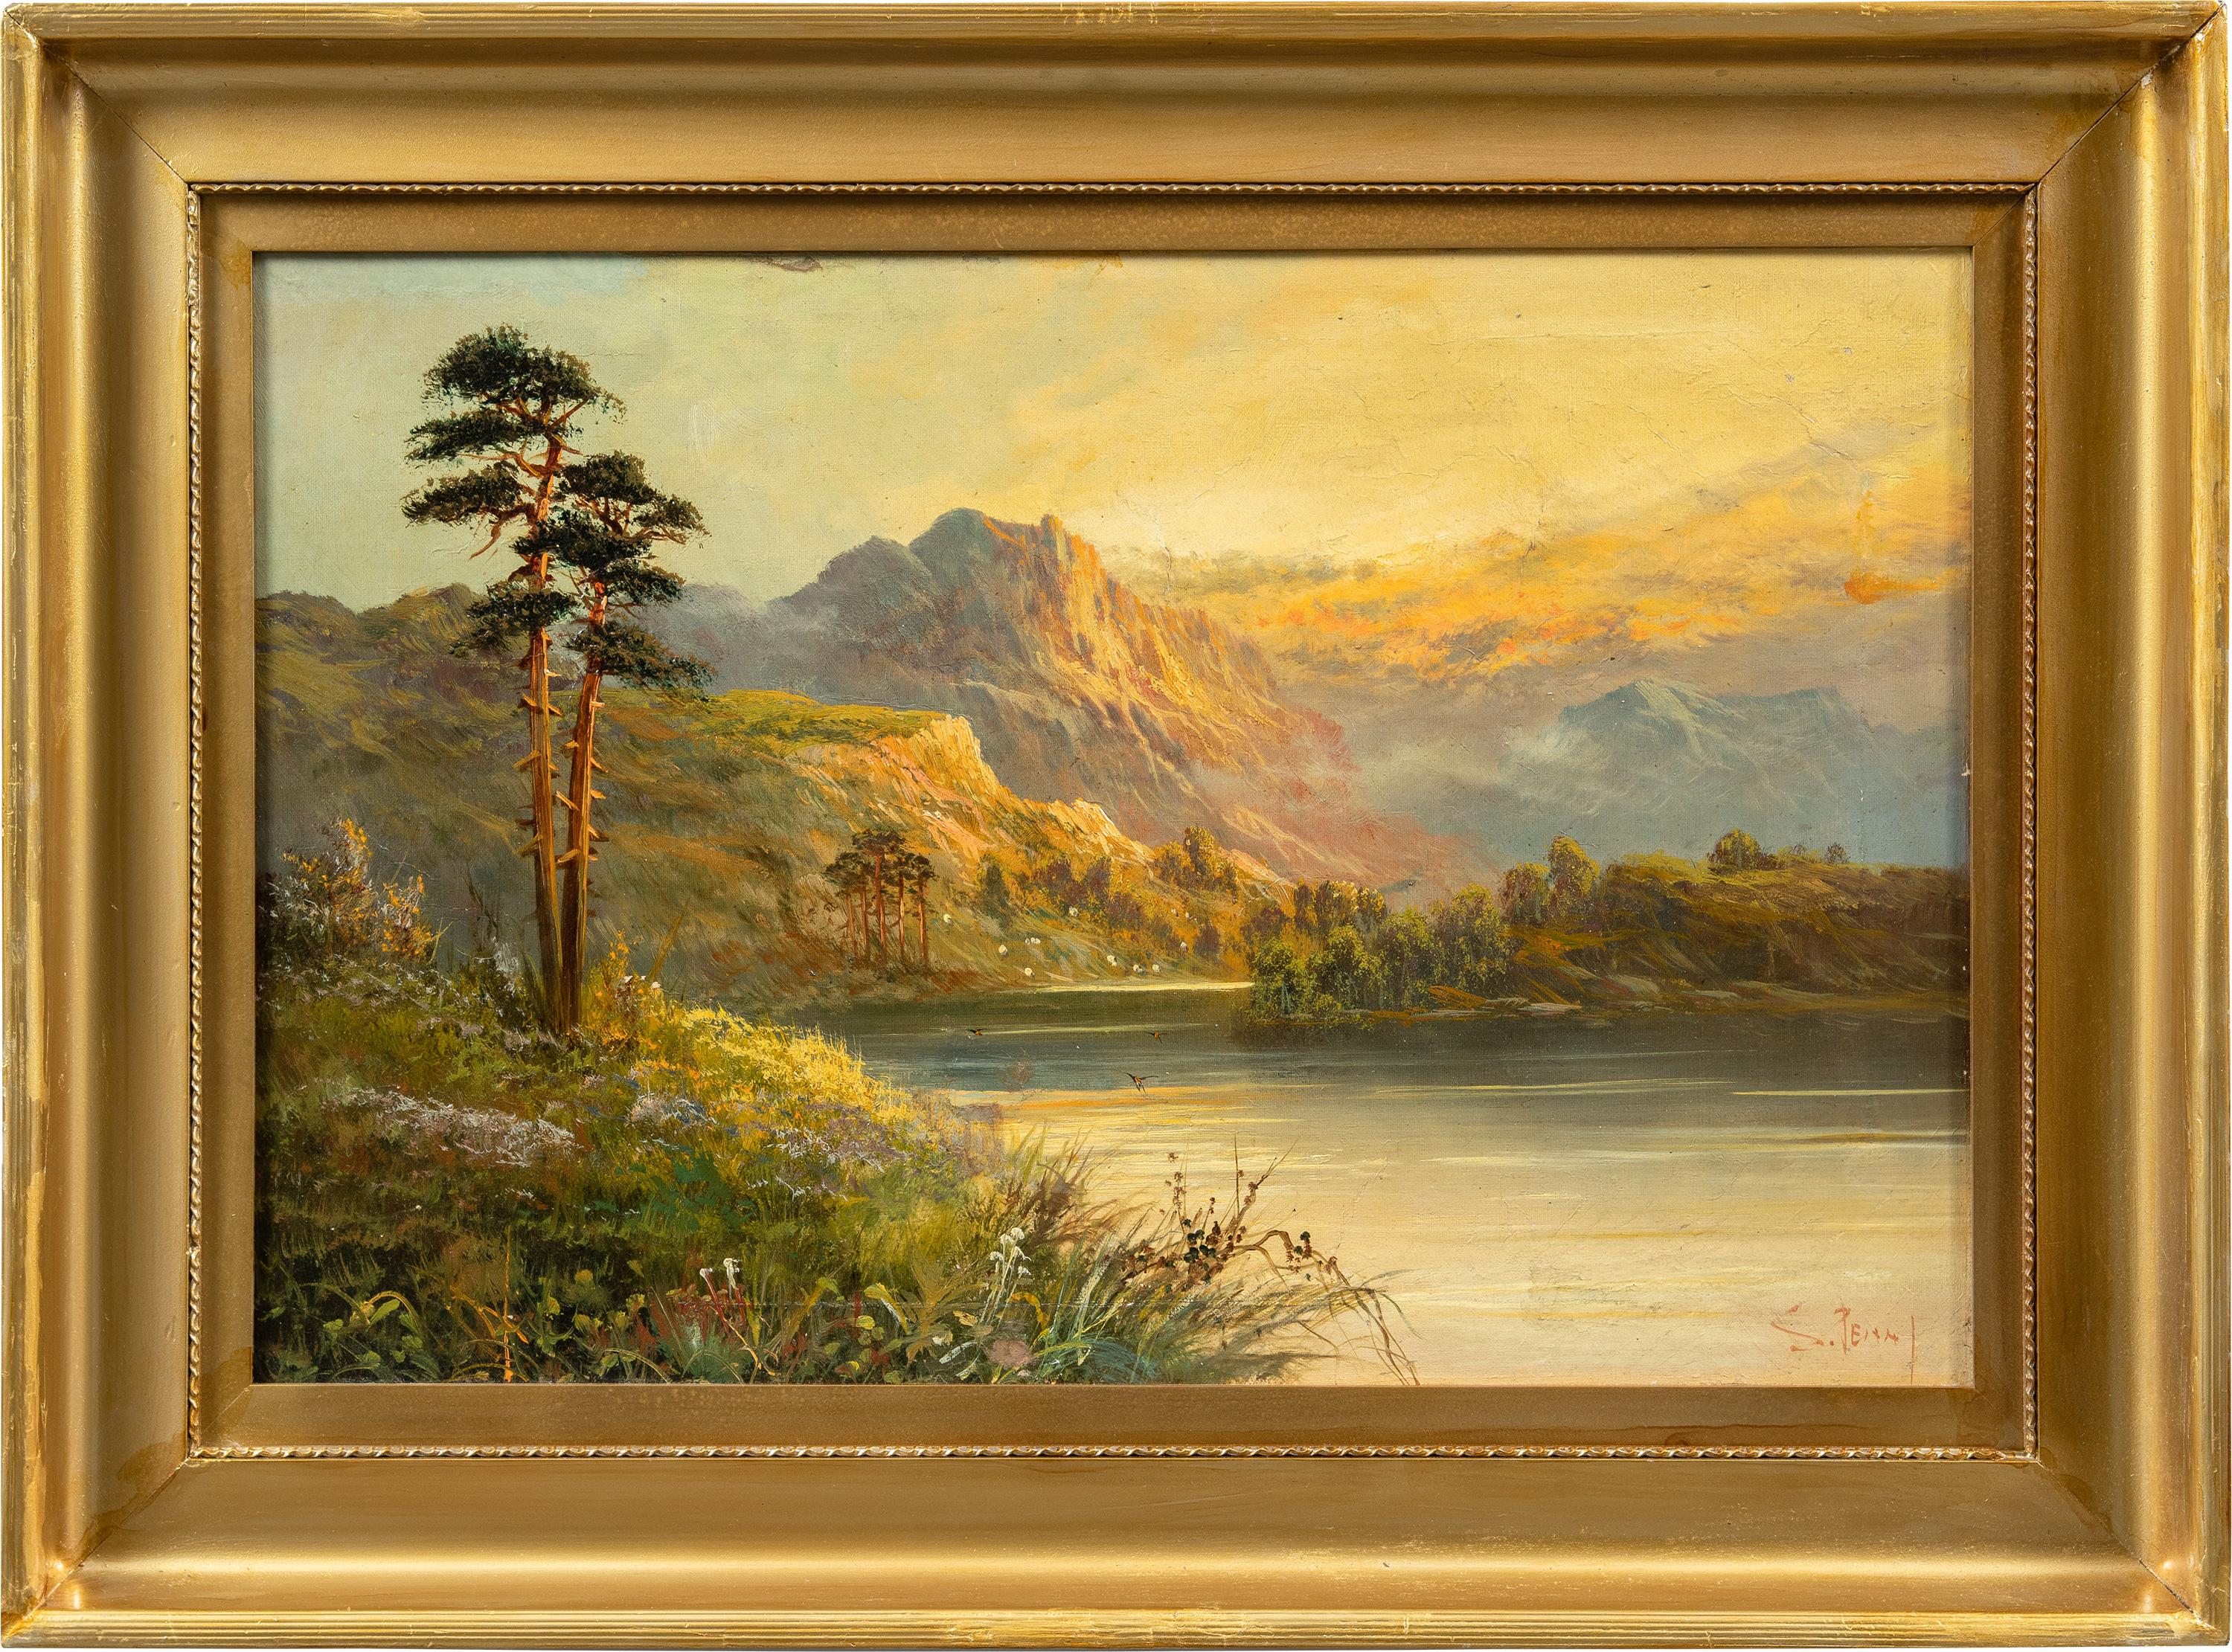 Unknown Figurative Painting - Landscape continental painter - Late 19th century painting - Mountain river view